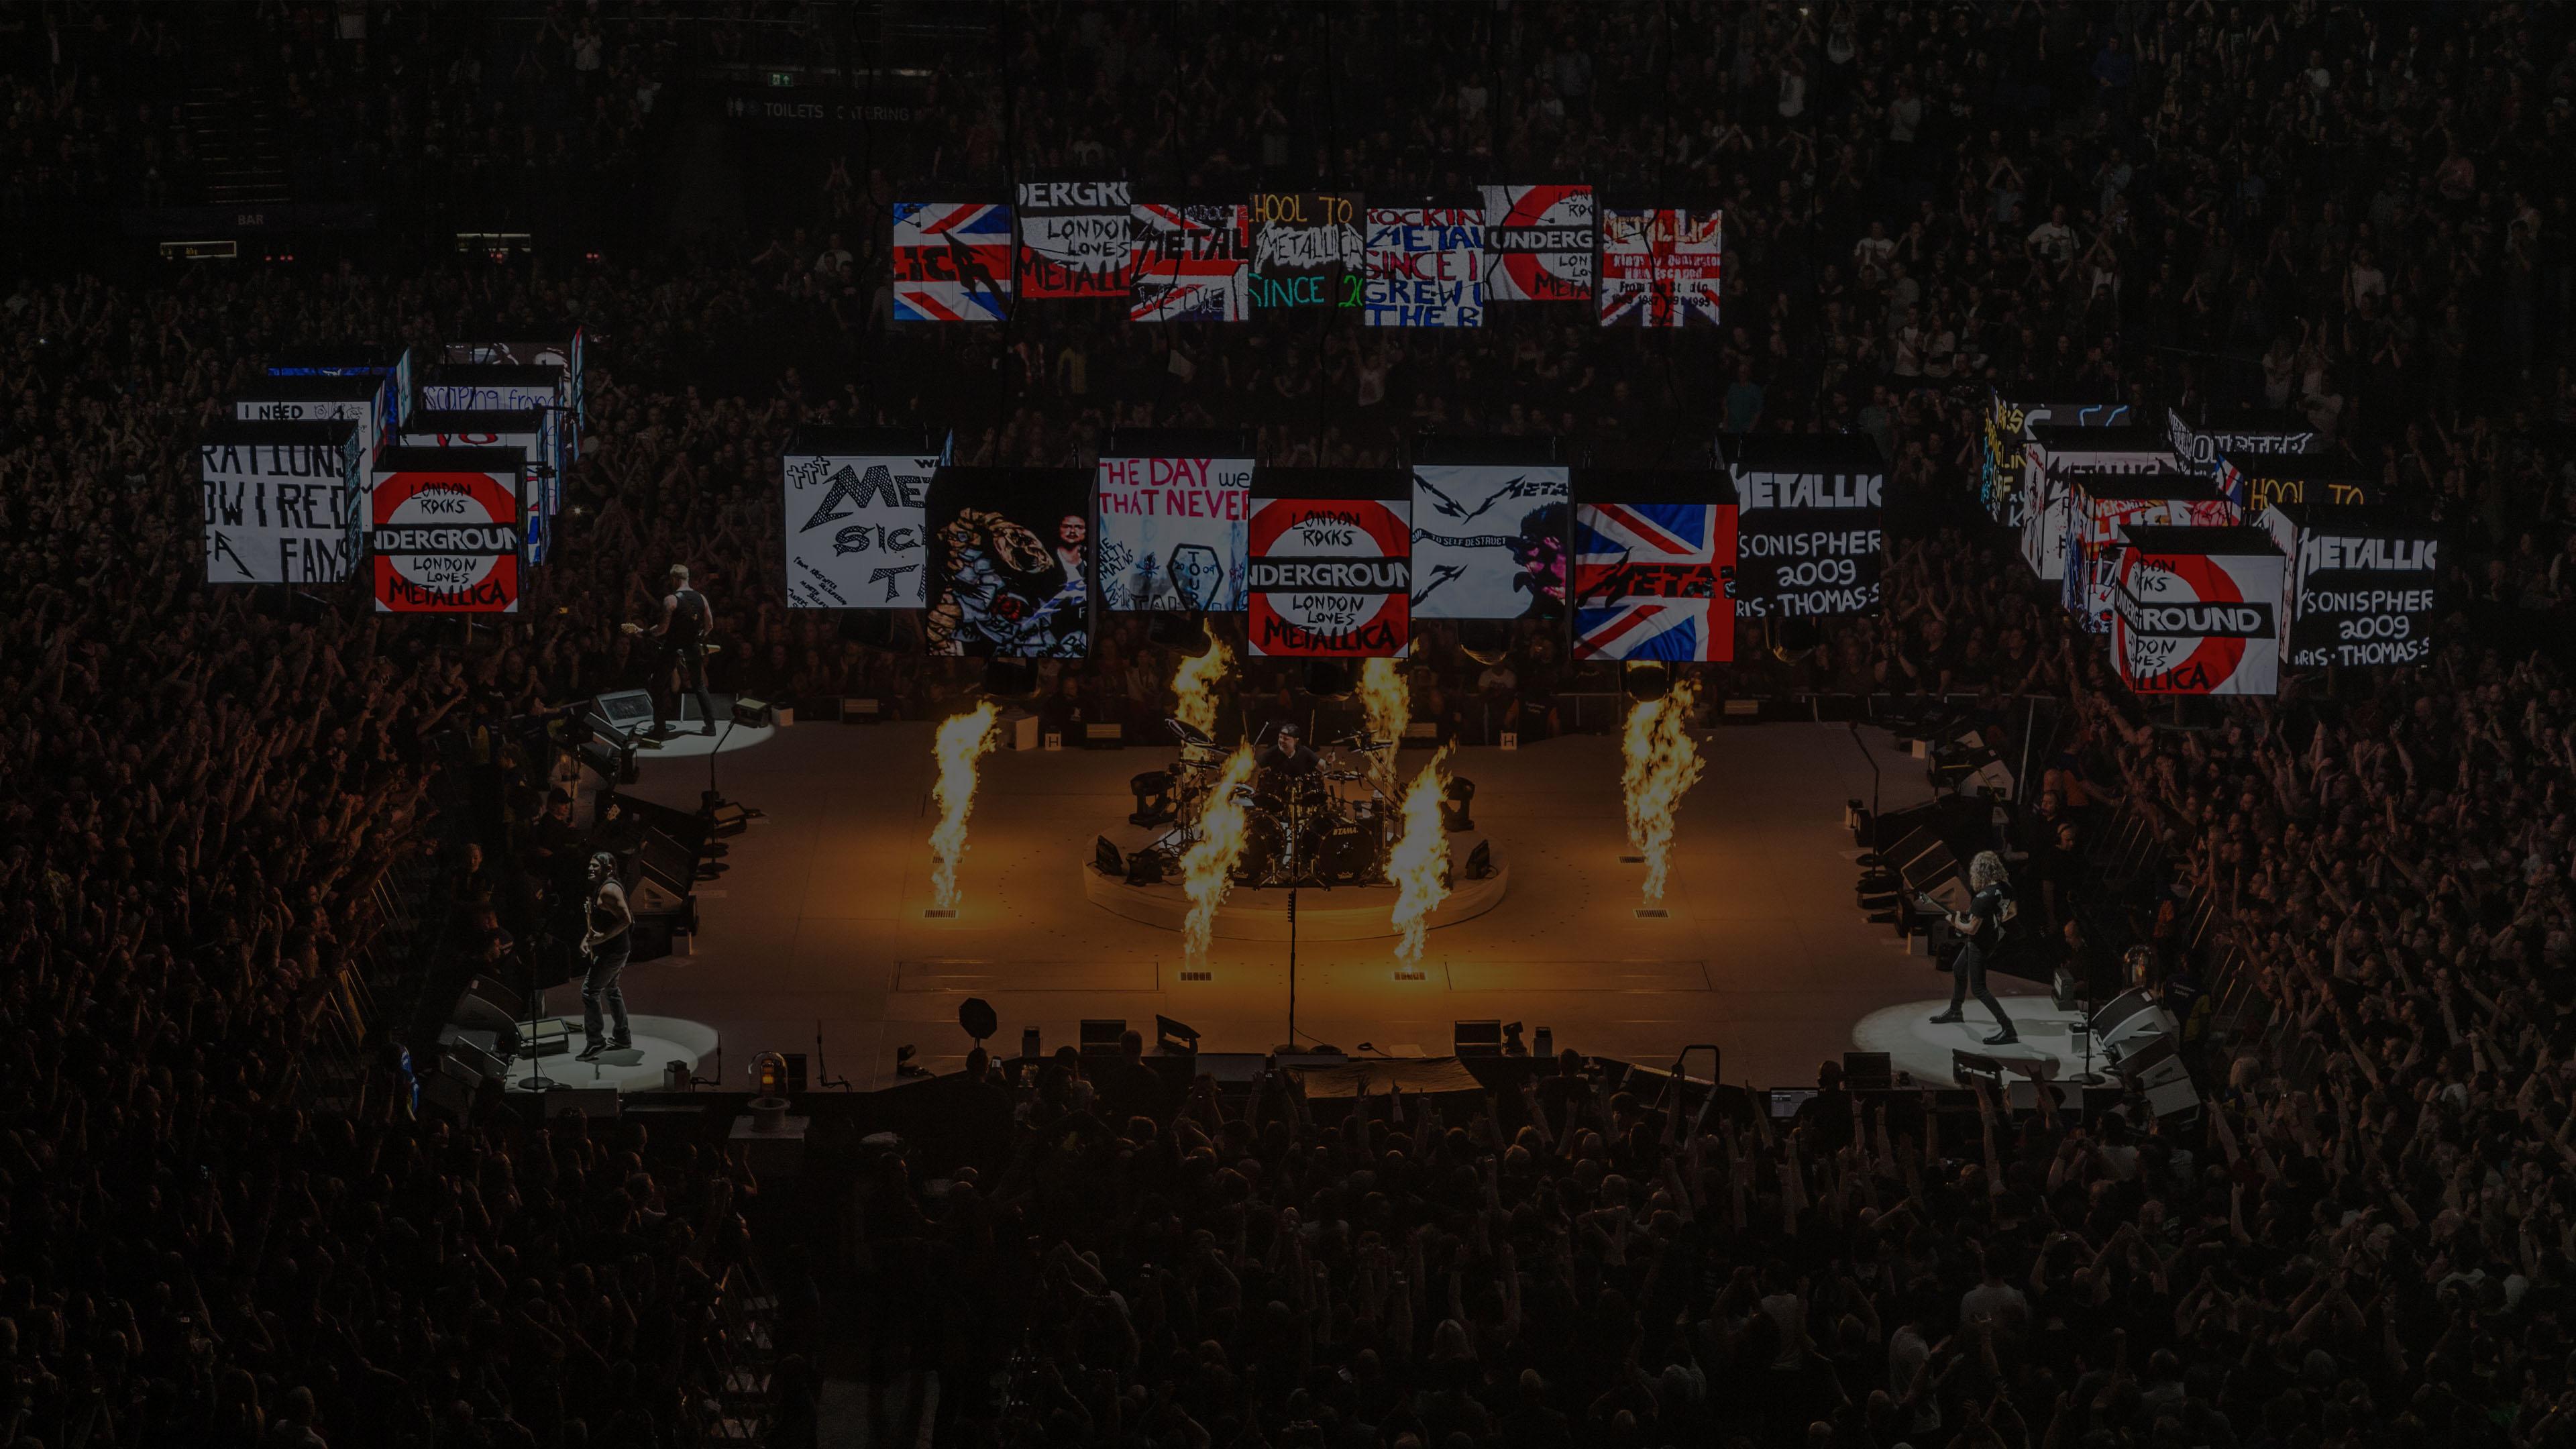 Metallica at The O2 Arena in London, England on October 22, 2017